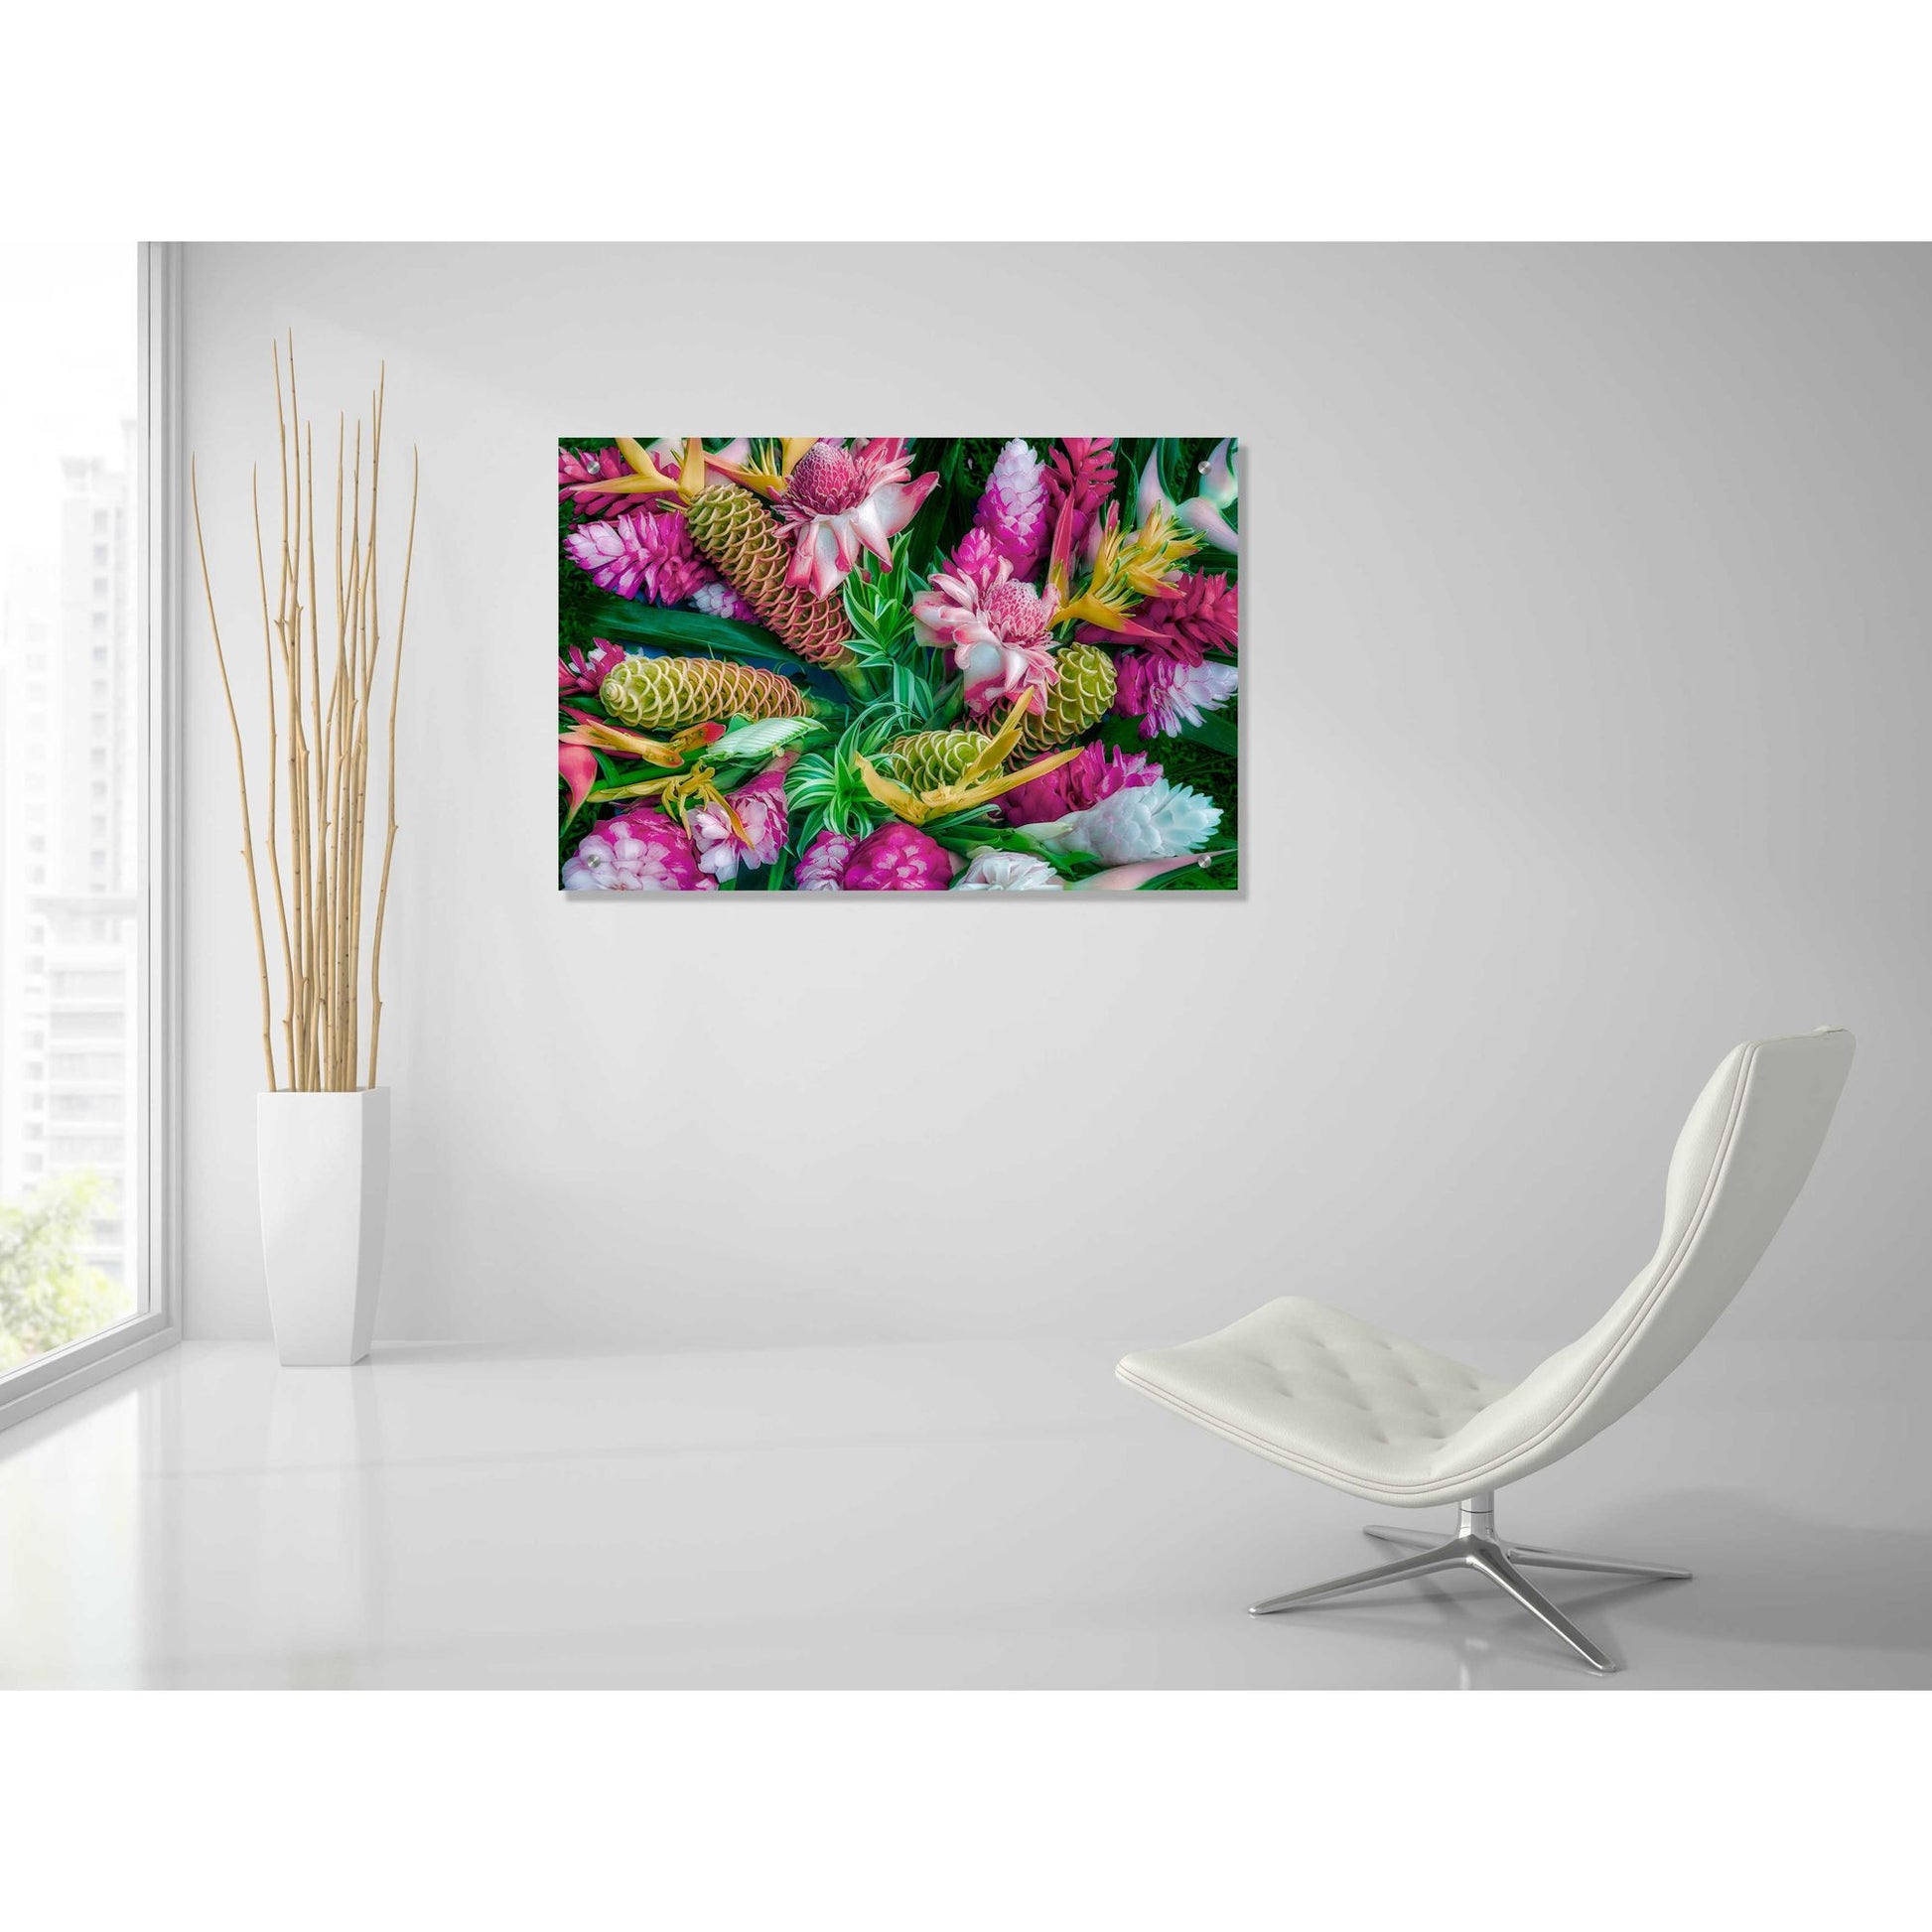 Epic Art 'Tropical Floral' by Dennis Frates, Acrylic Glass Wall Art,36x24